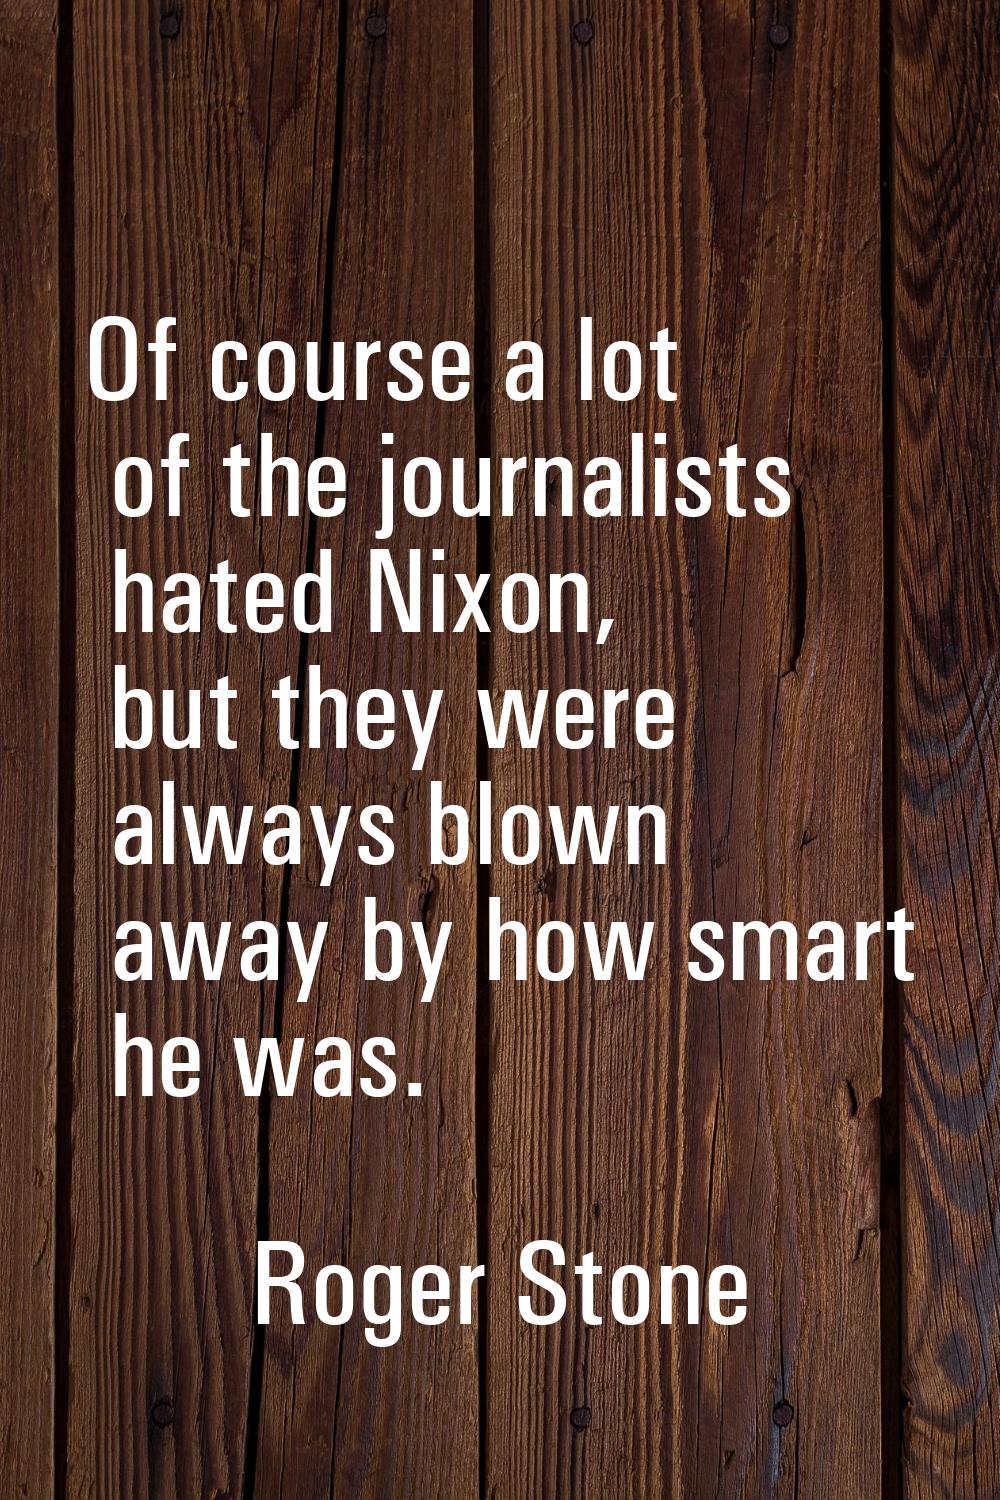 Of course a lot of the journalists hated Nixon, but they were always blown away by how smart he was